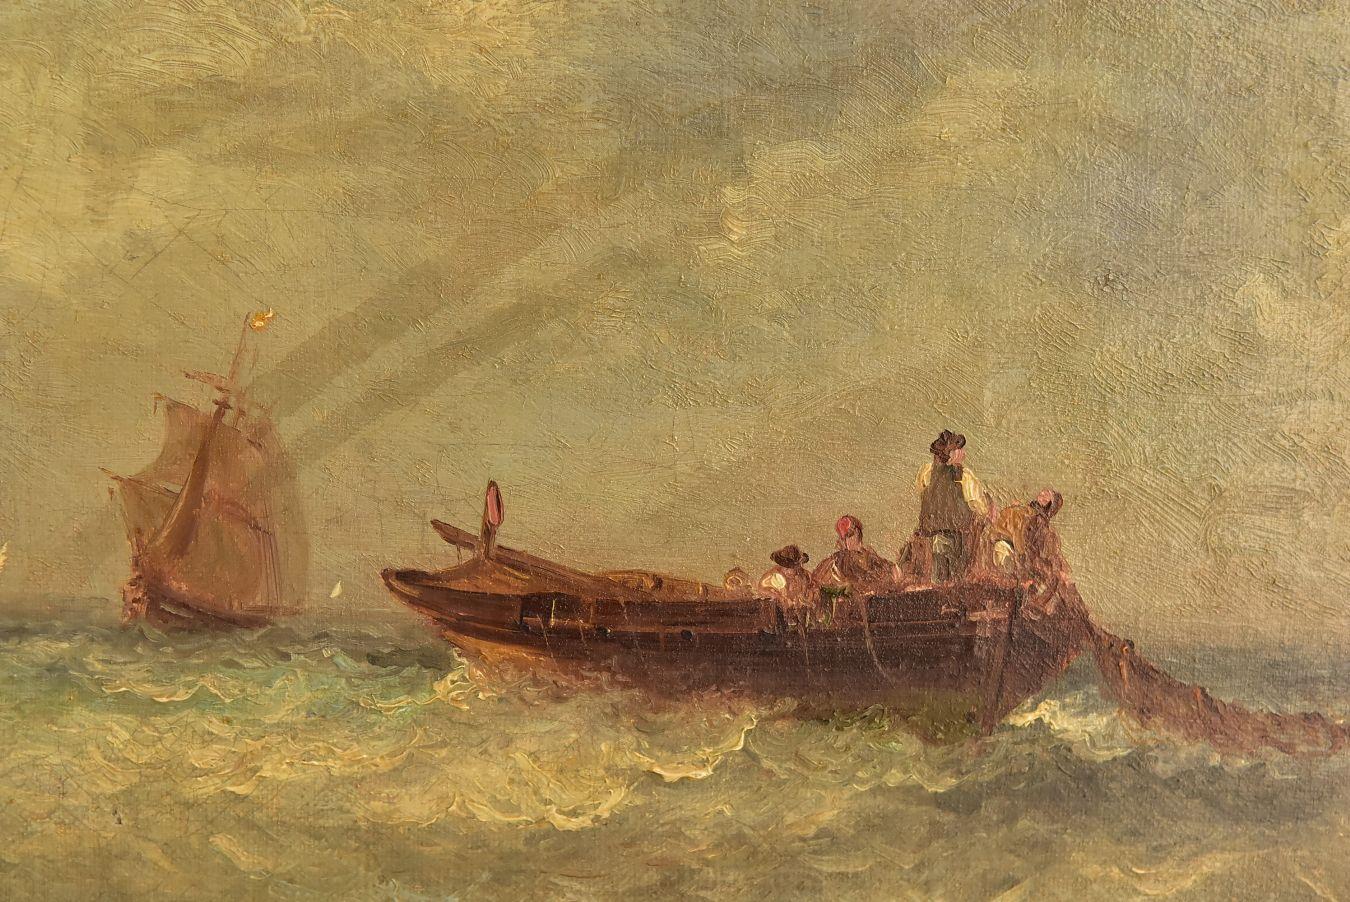 Late 19th century Marine oil painting representing a fishing boat at sea with sailboats in the distance. Period by Paul Seignon (1820-1890).